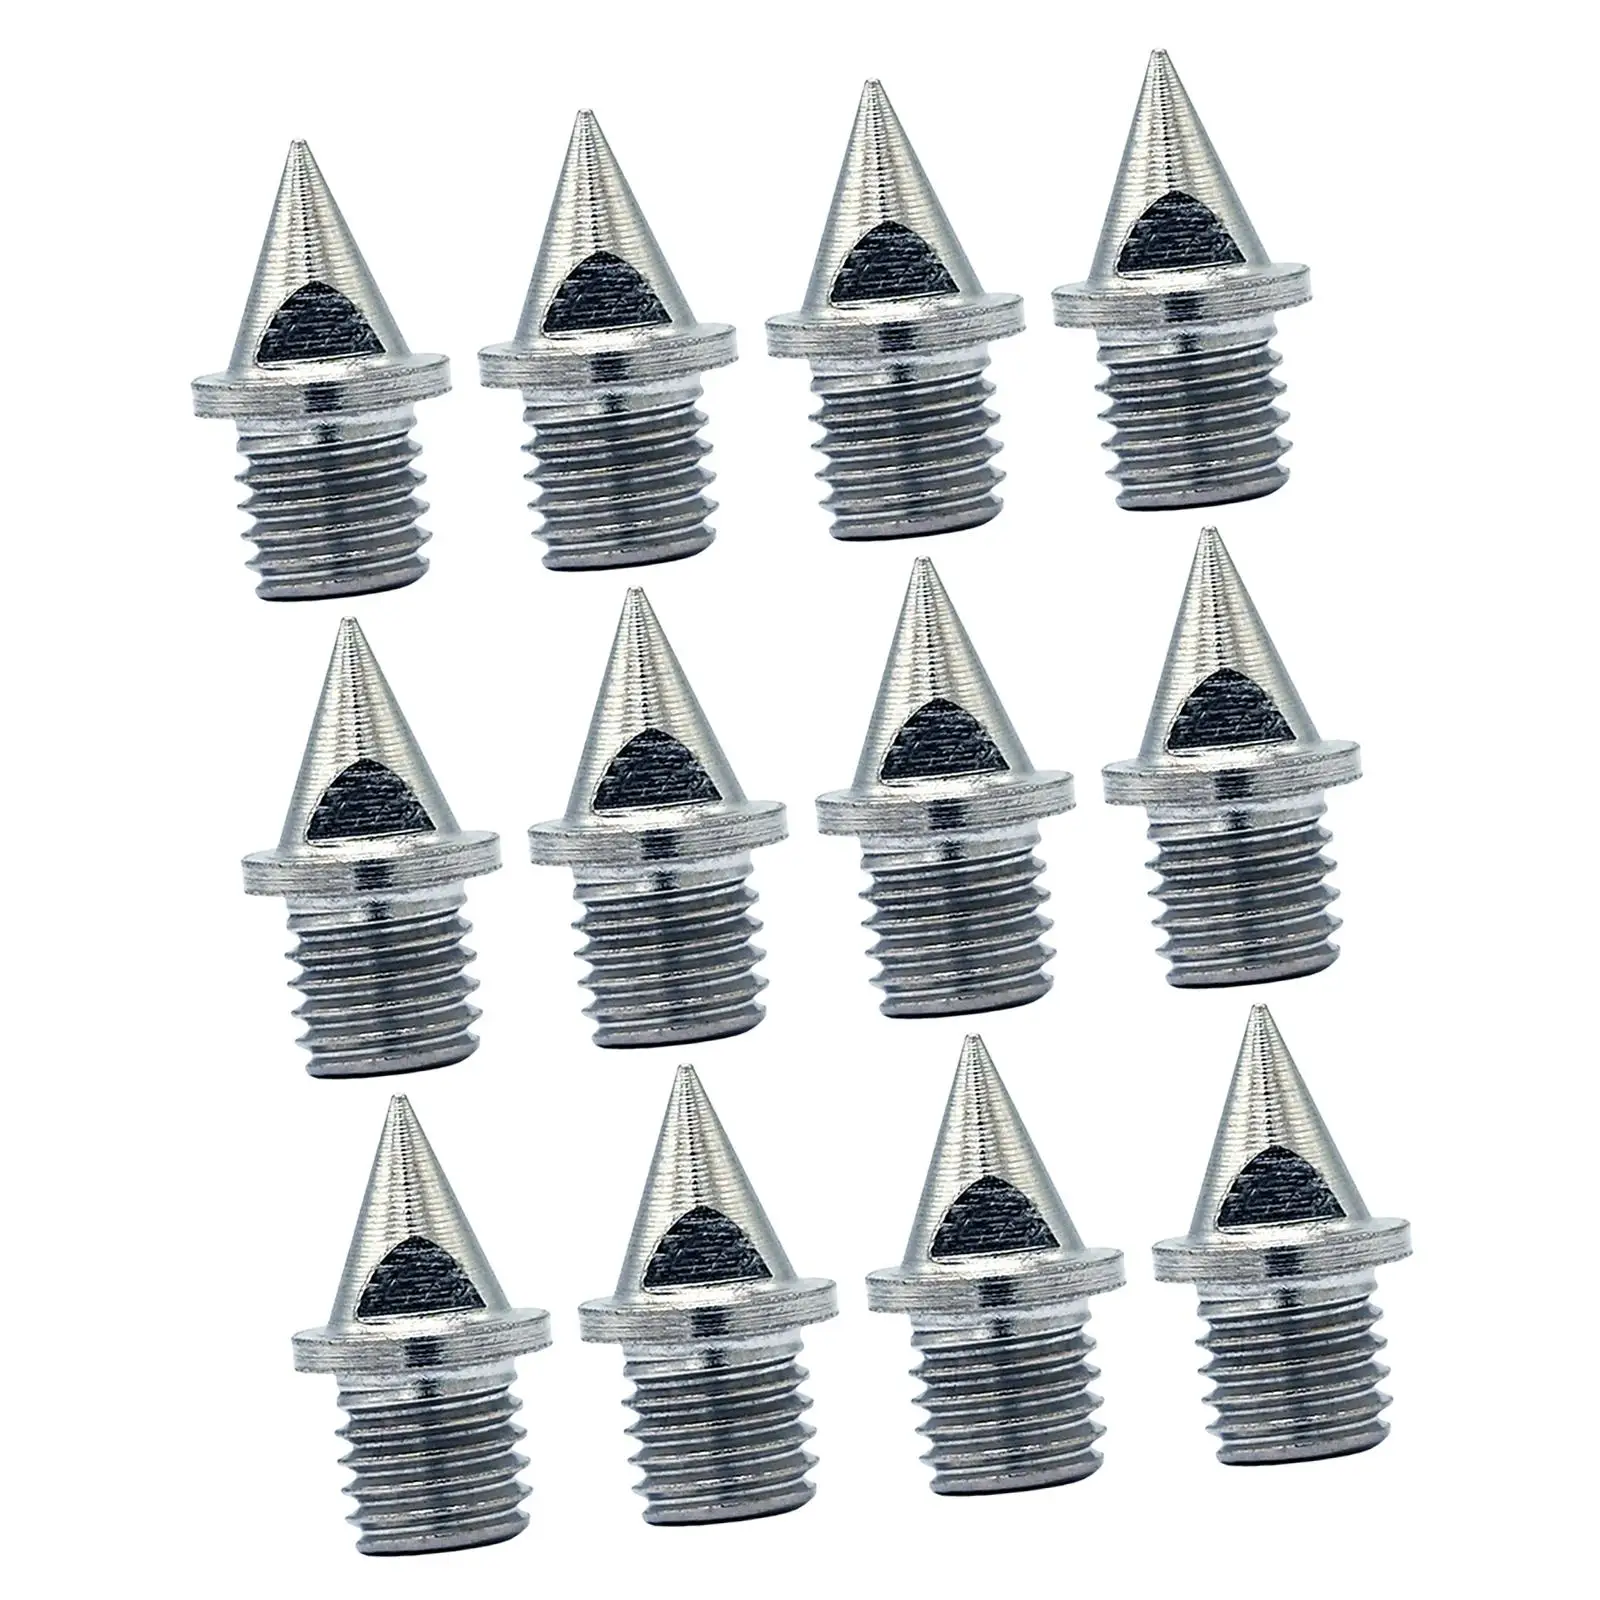 12Pcs Track Spikes Studs Shoe Spikes Replacement Track Shoes Pyramid Spikes Hard